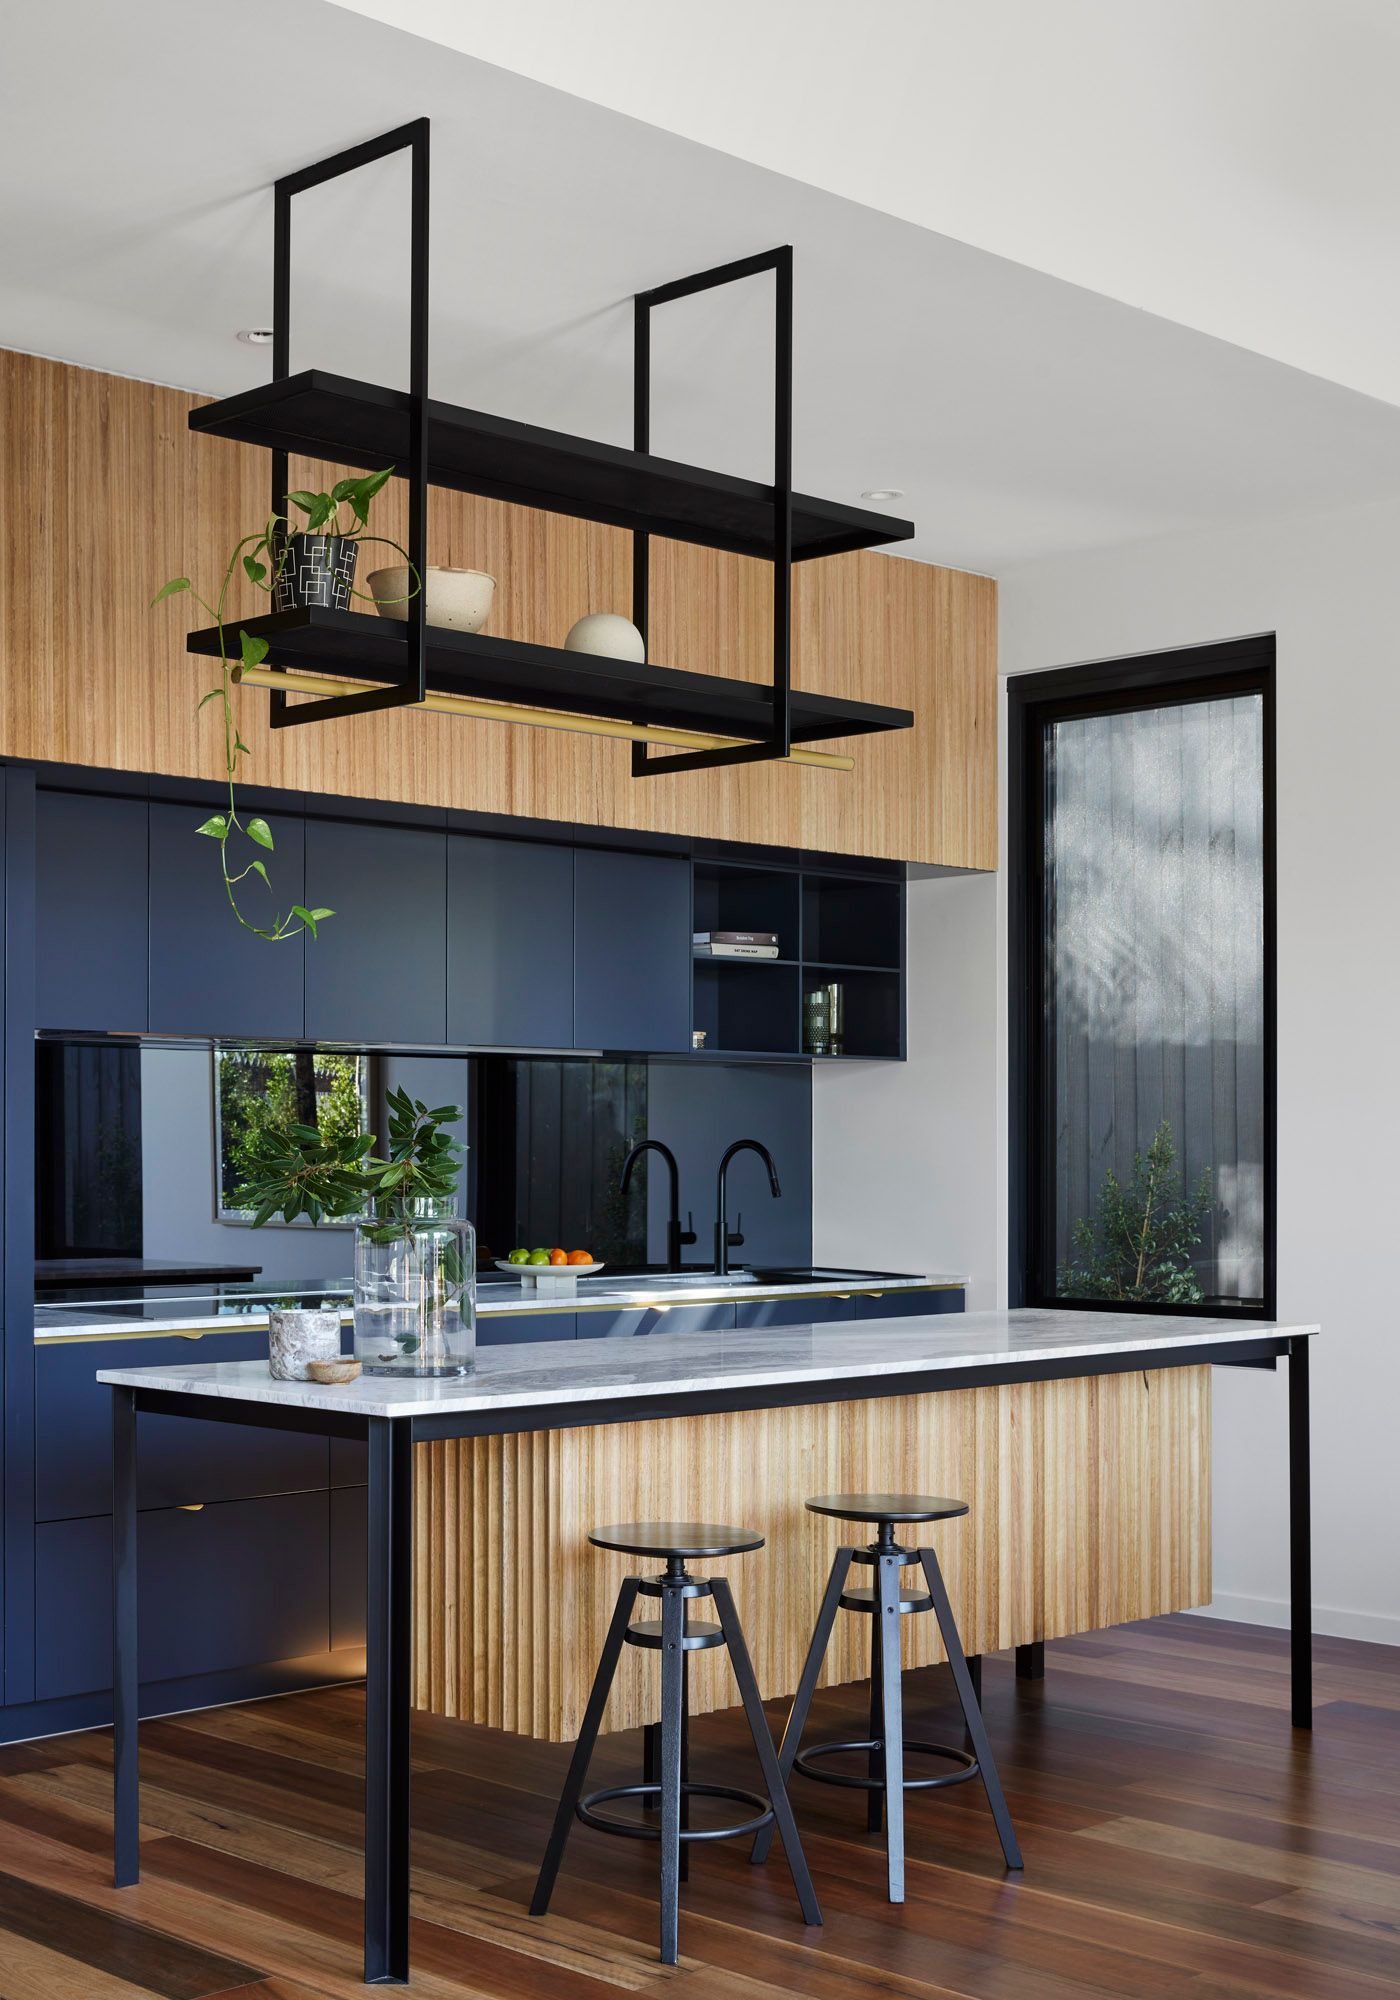 Slate House by Austin Maynard Architects. Detailed view of kitchen interior